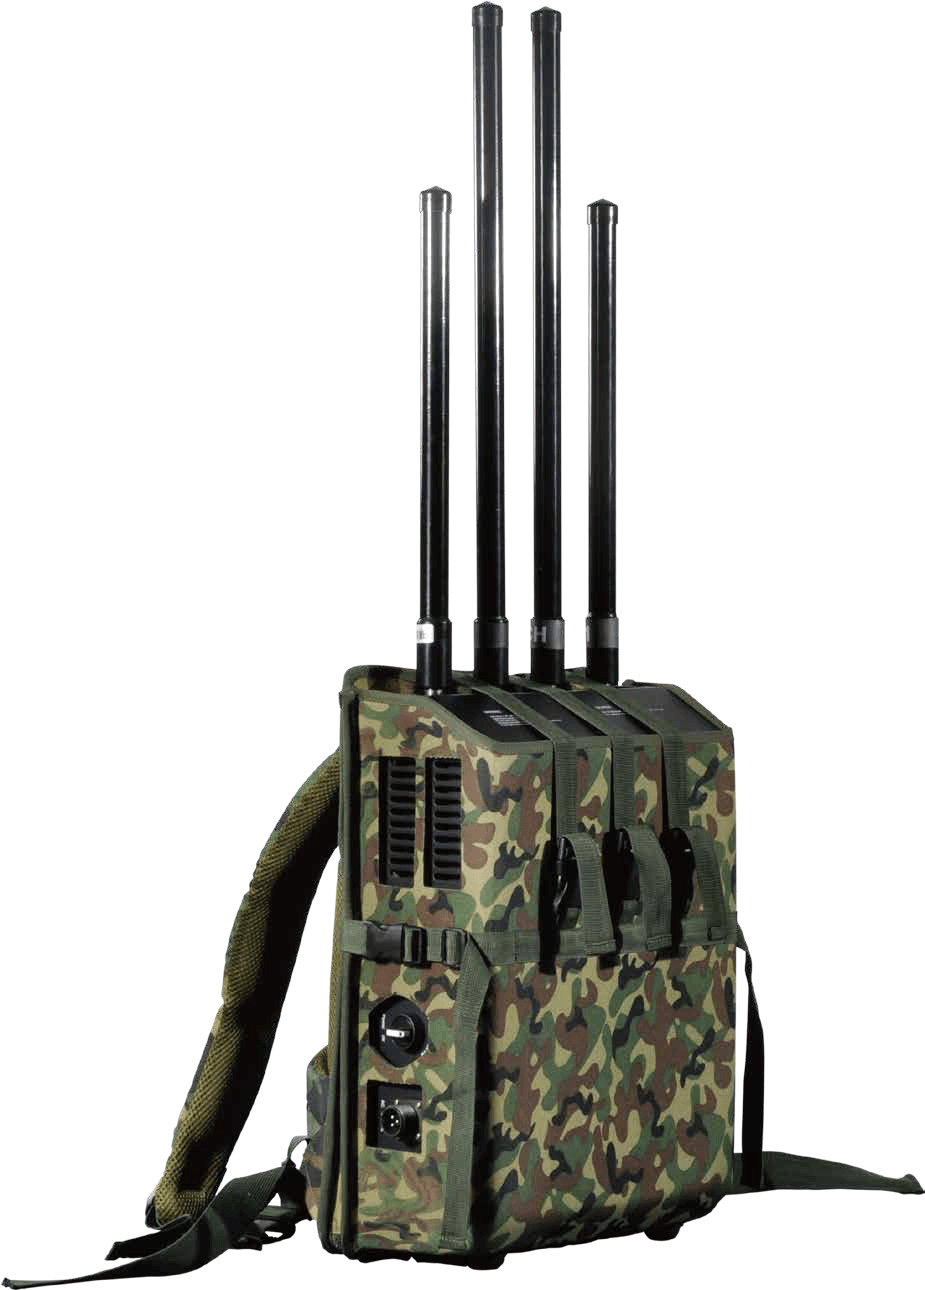 Backpack drone jammer